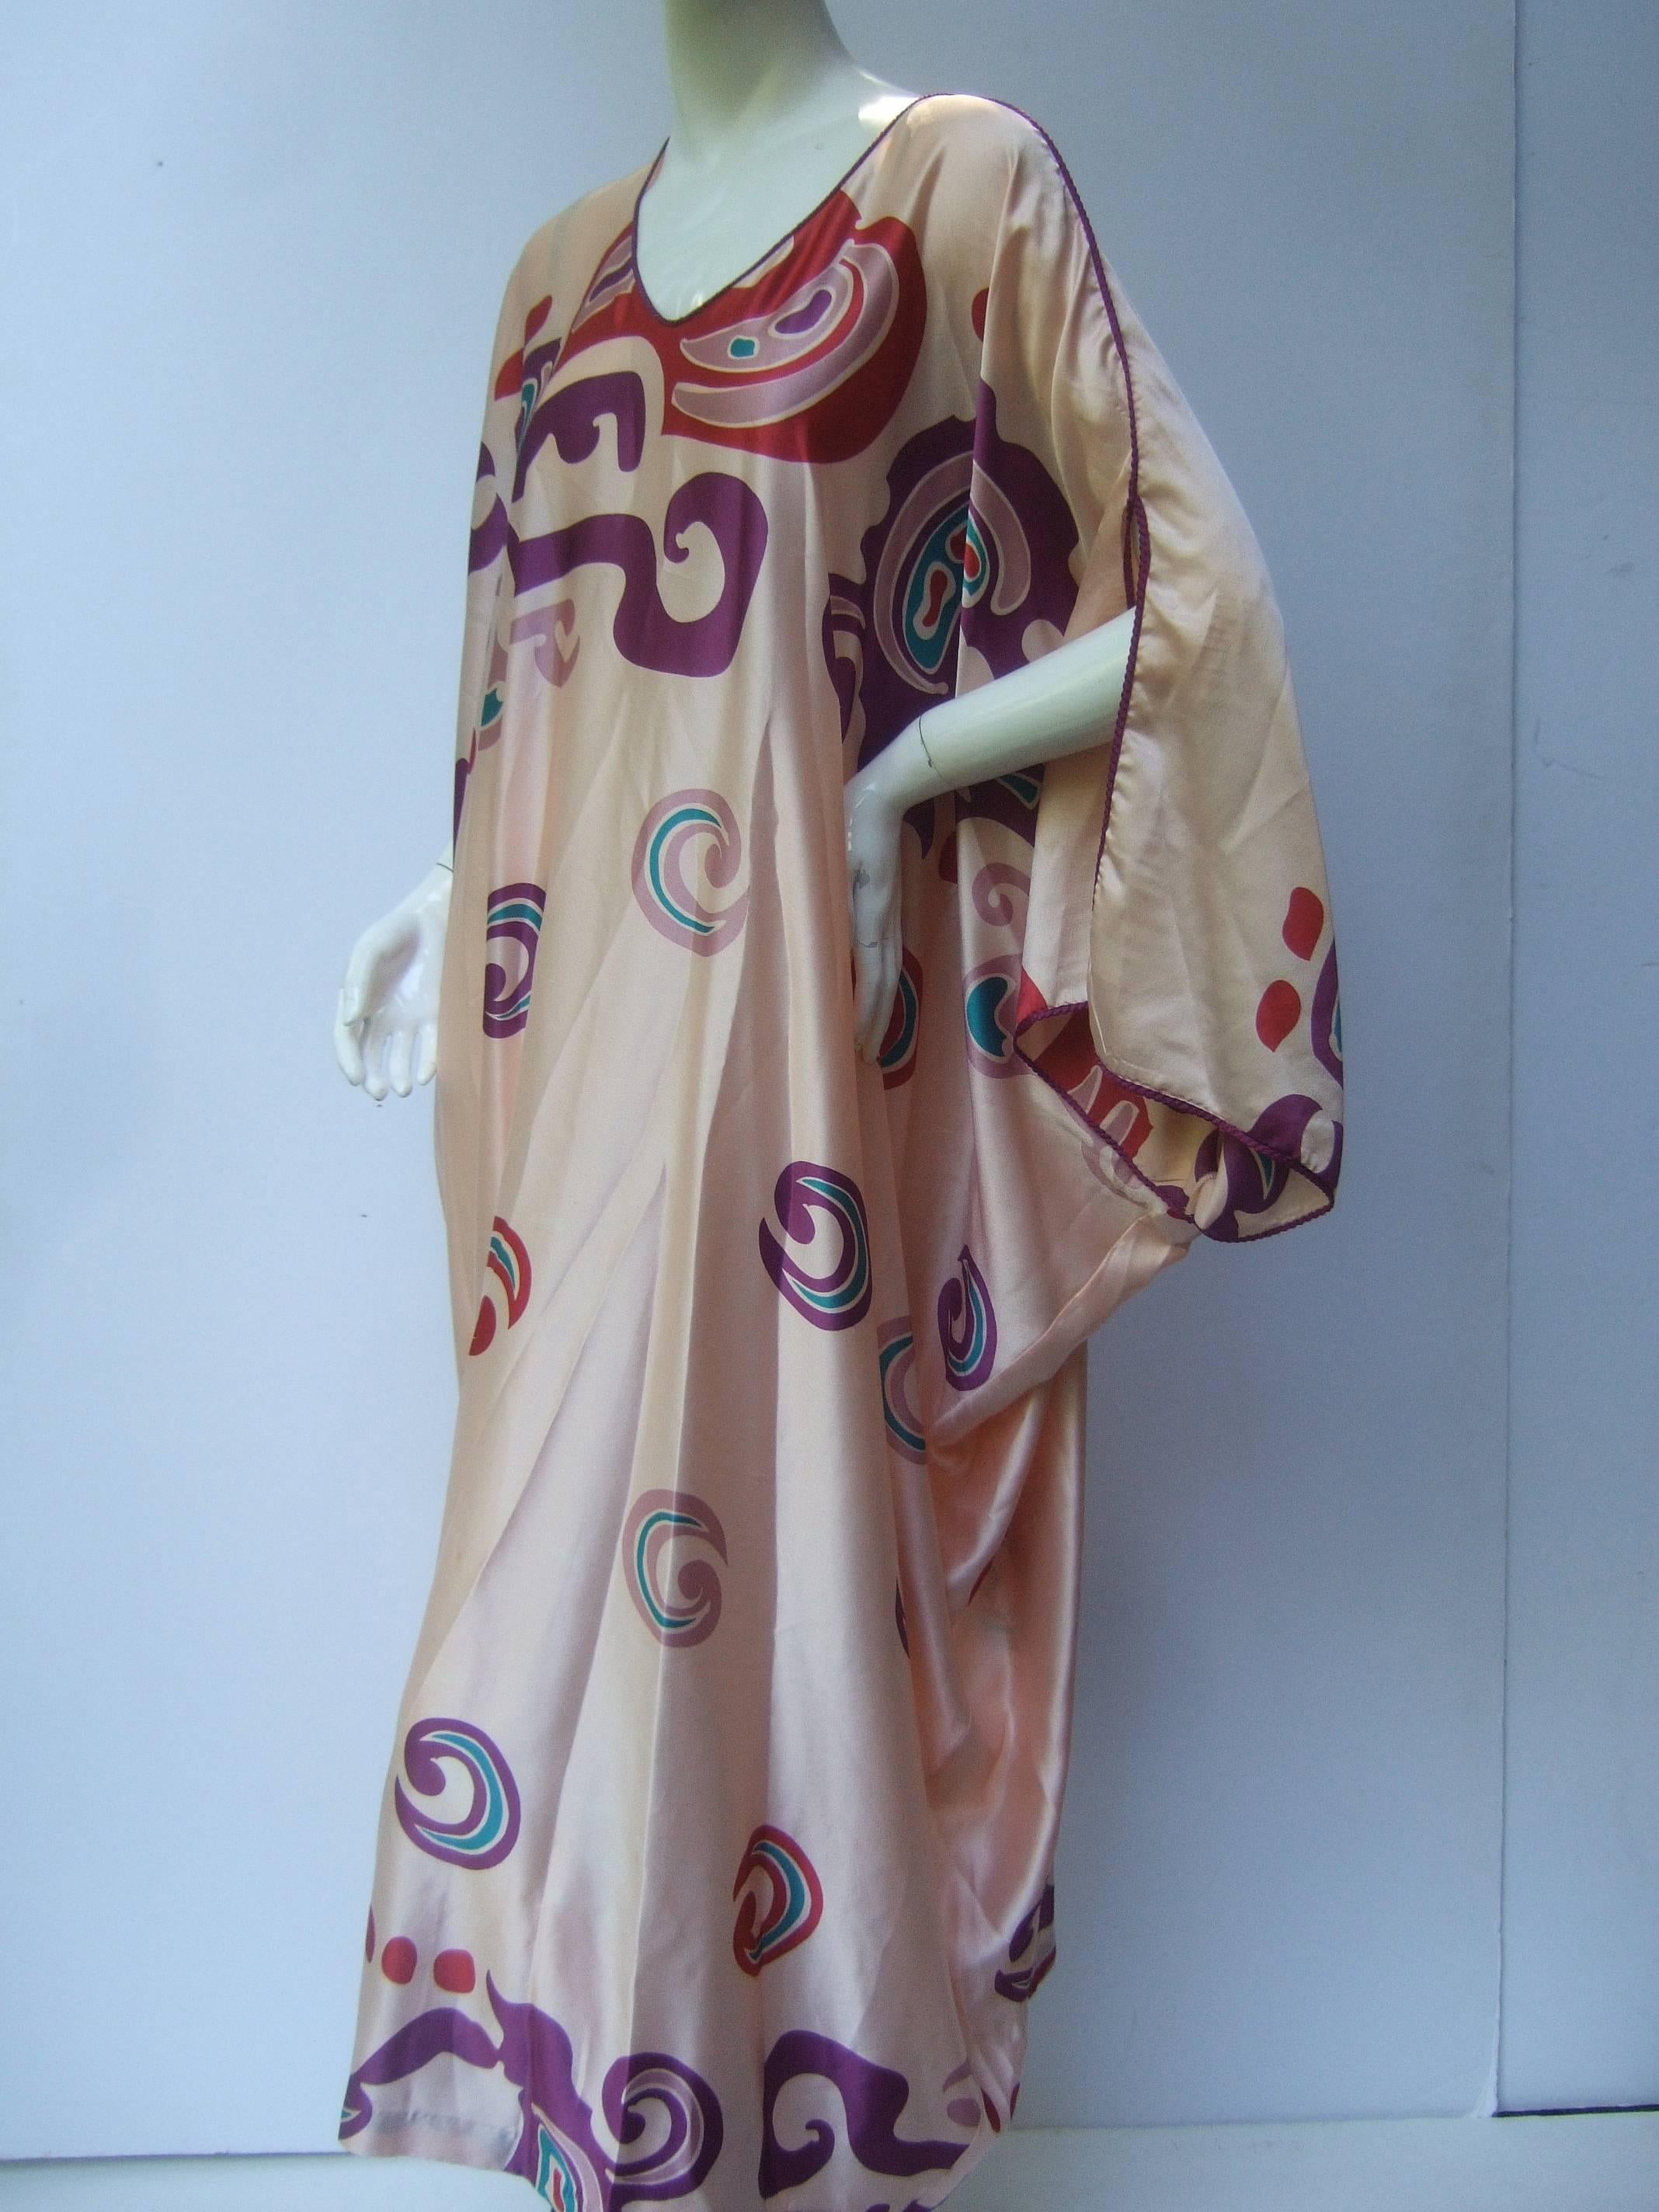 Mary McFadden Mod abstract print caftan 
The spectacular print is a collage of bold 
swirls set against a luminous silky peach
background

The graphic print is a spectrum of dark
purples, deep reds with hints of teal
blue / green colors 